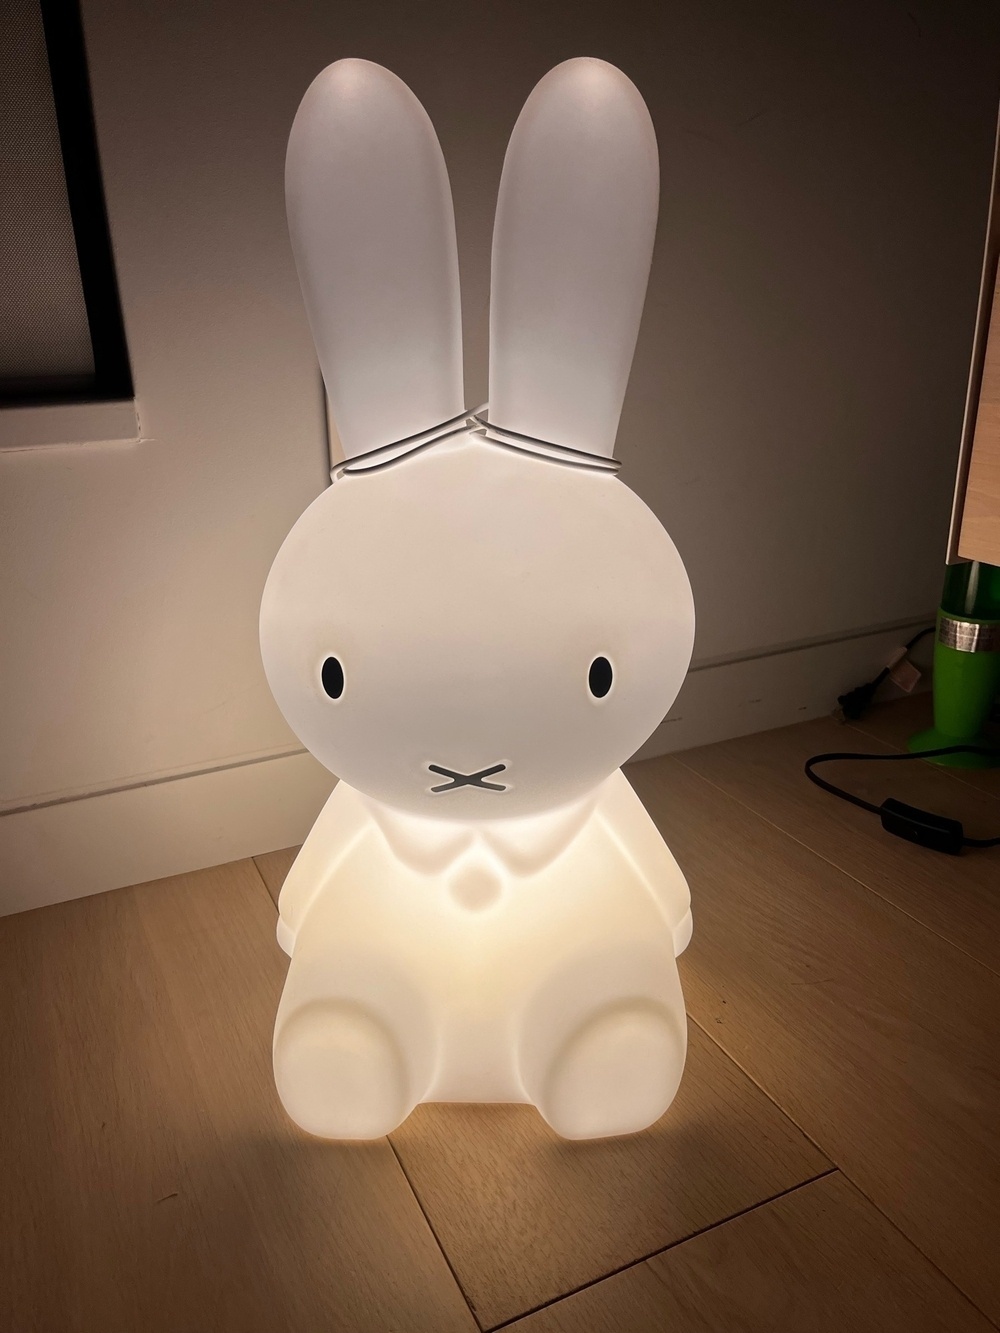 A childrenâ€™s night light looking like Miffy, a fictional rabbit